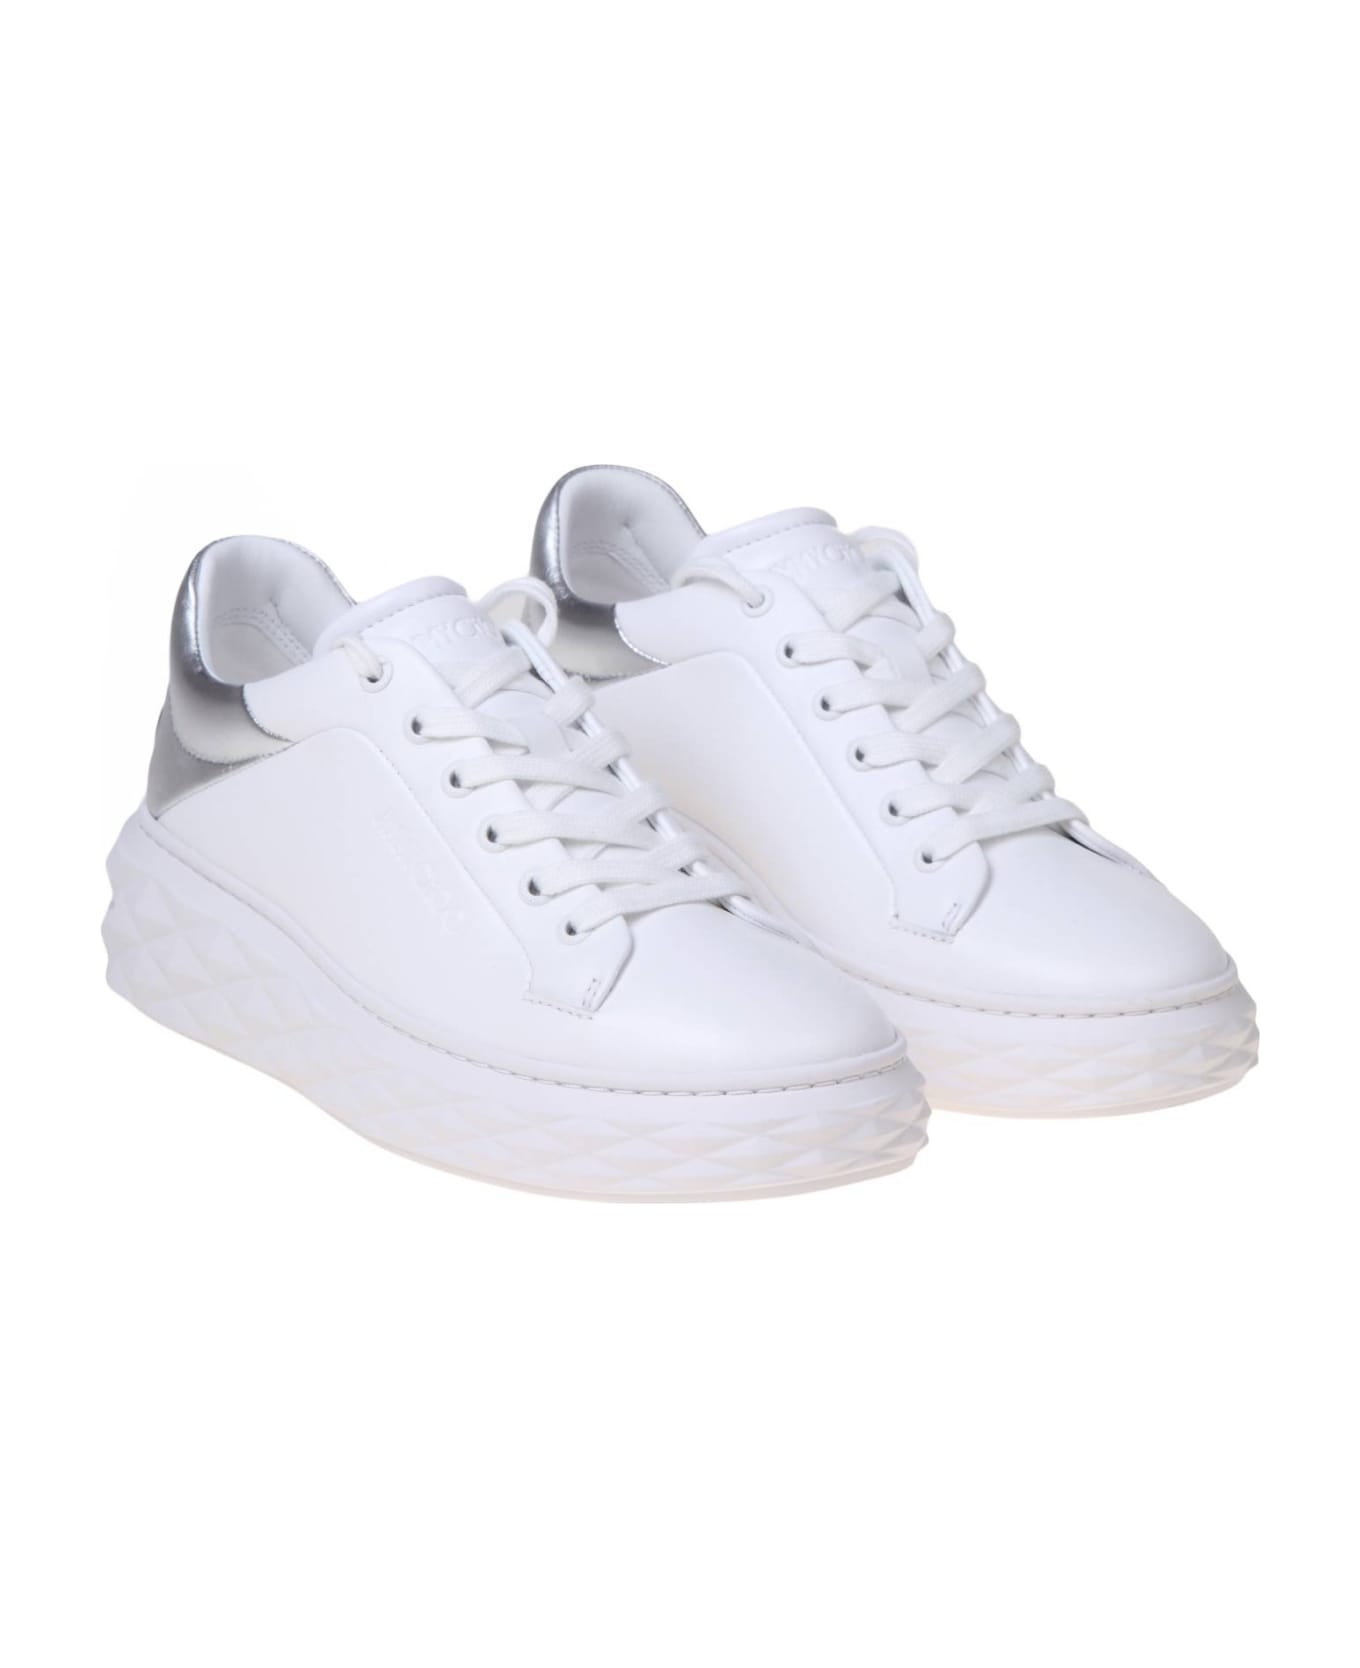 Jimmy Choo Diamond Maxi Sneakers In White And Silver Leather - White